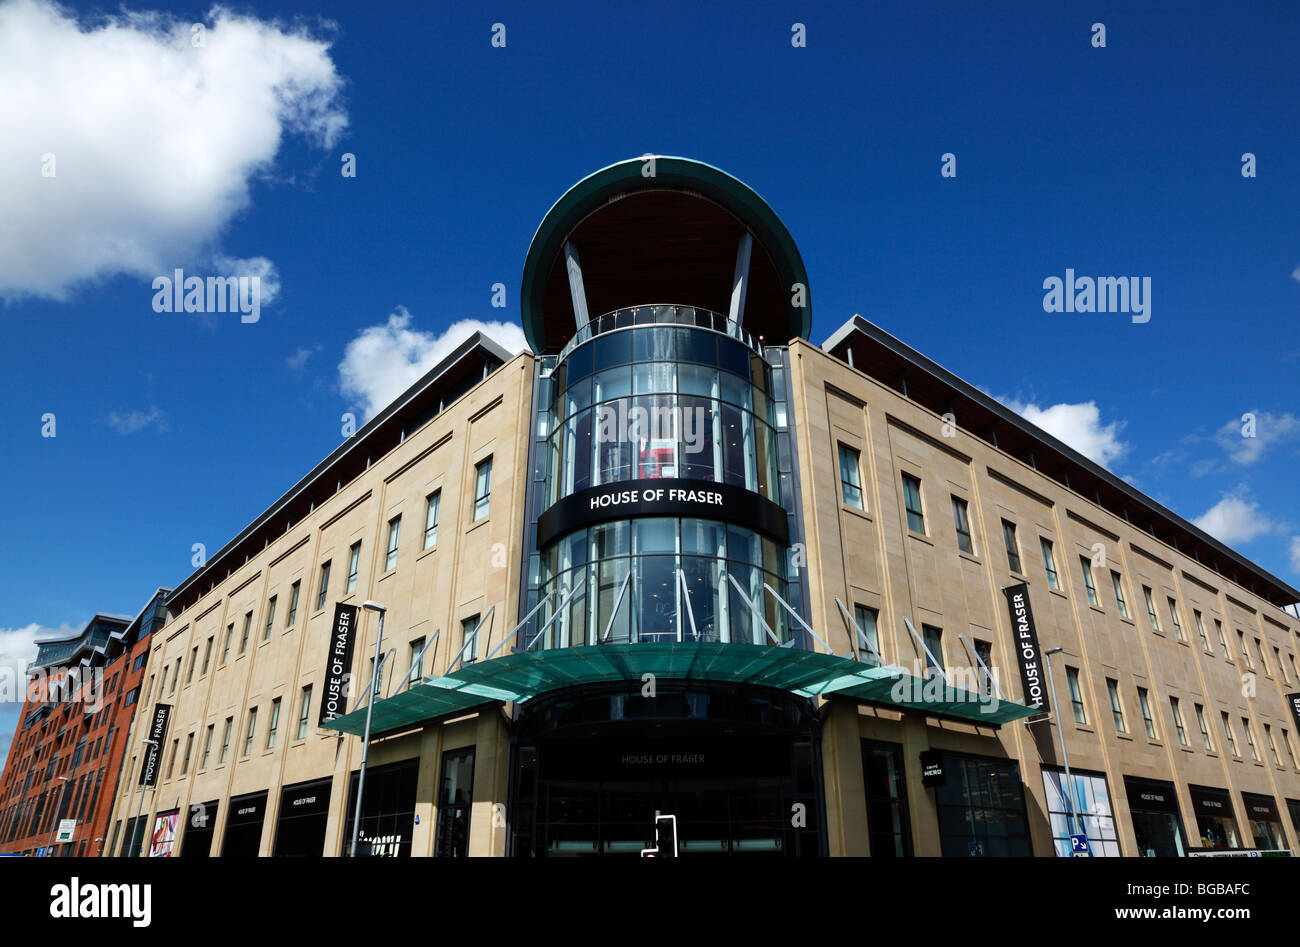 Ireland, North, Belfast, Entrance to the House of Fraser department store on the corner of Victoria and Chichester Street. Stock Photo